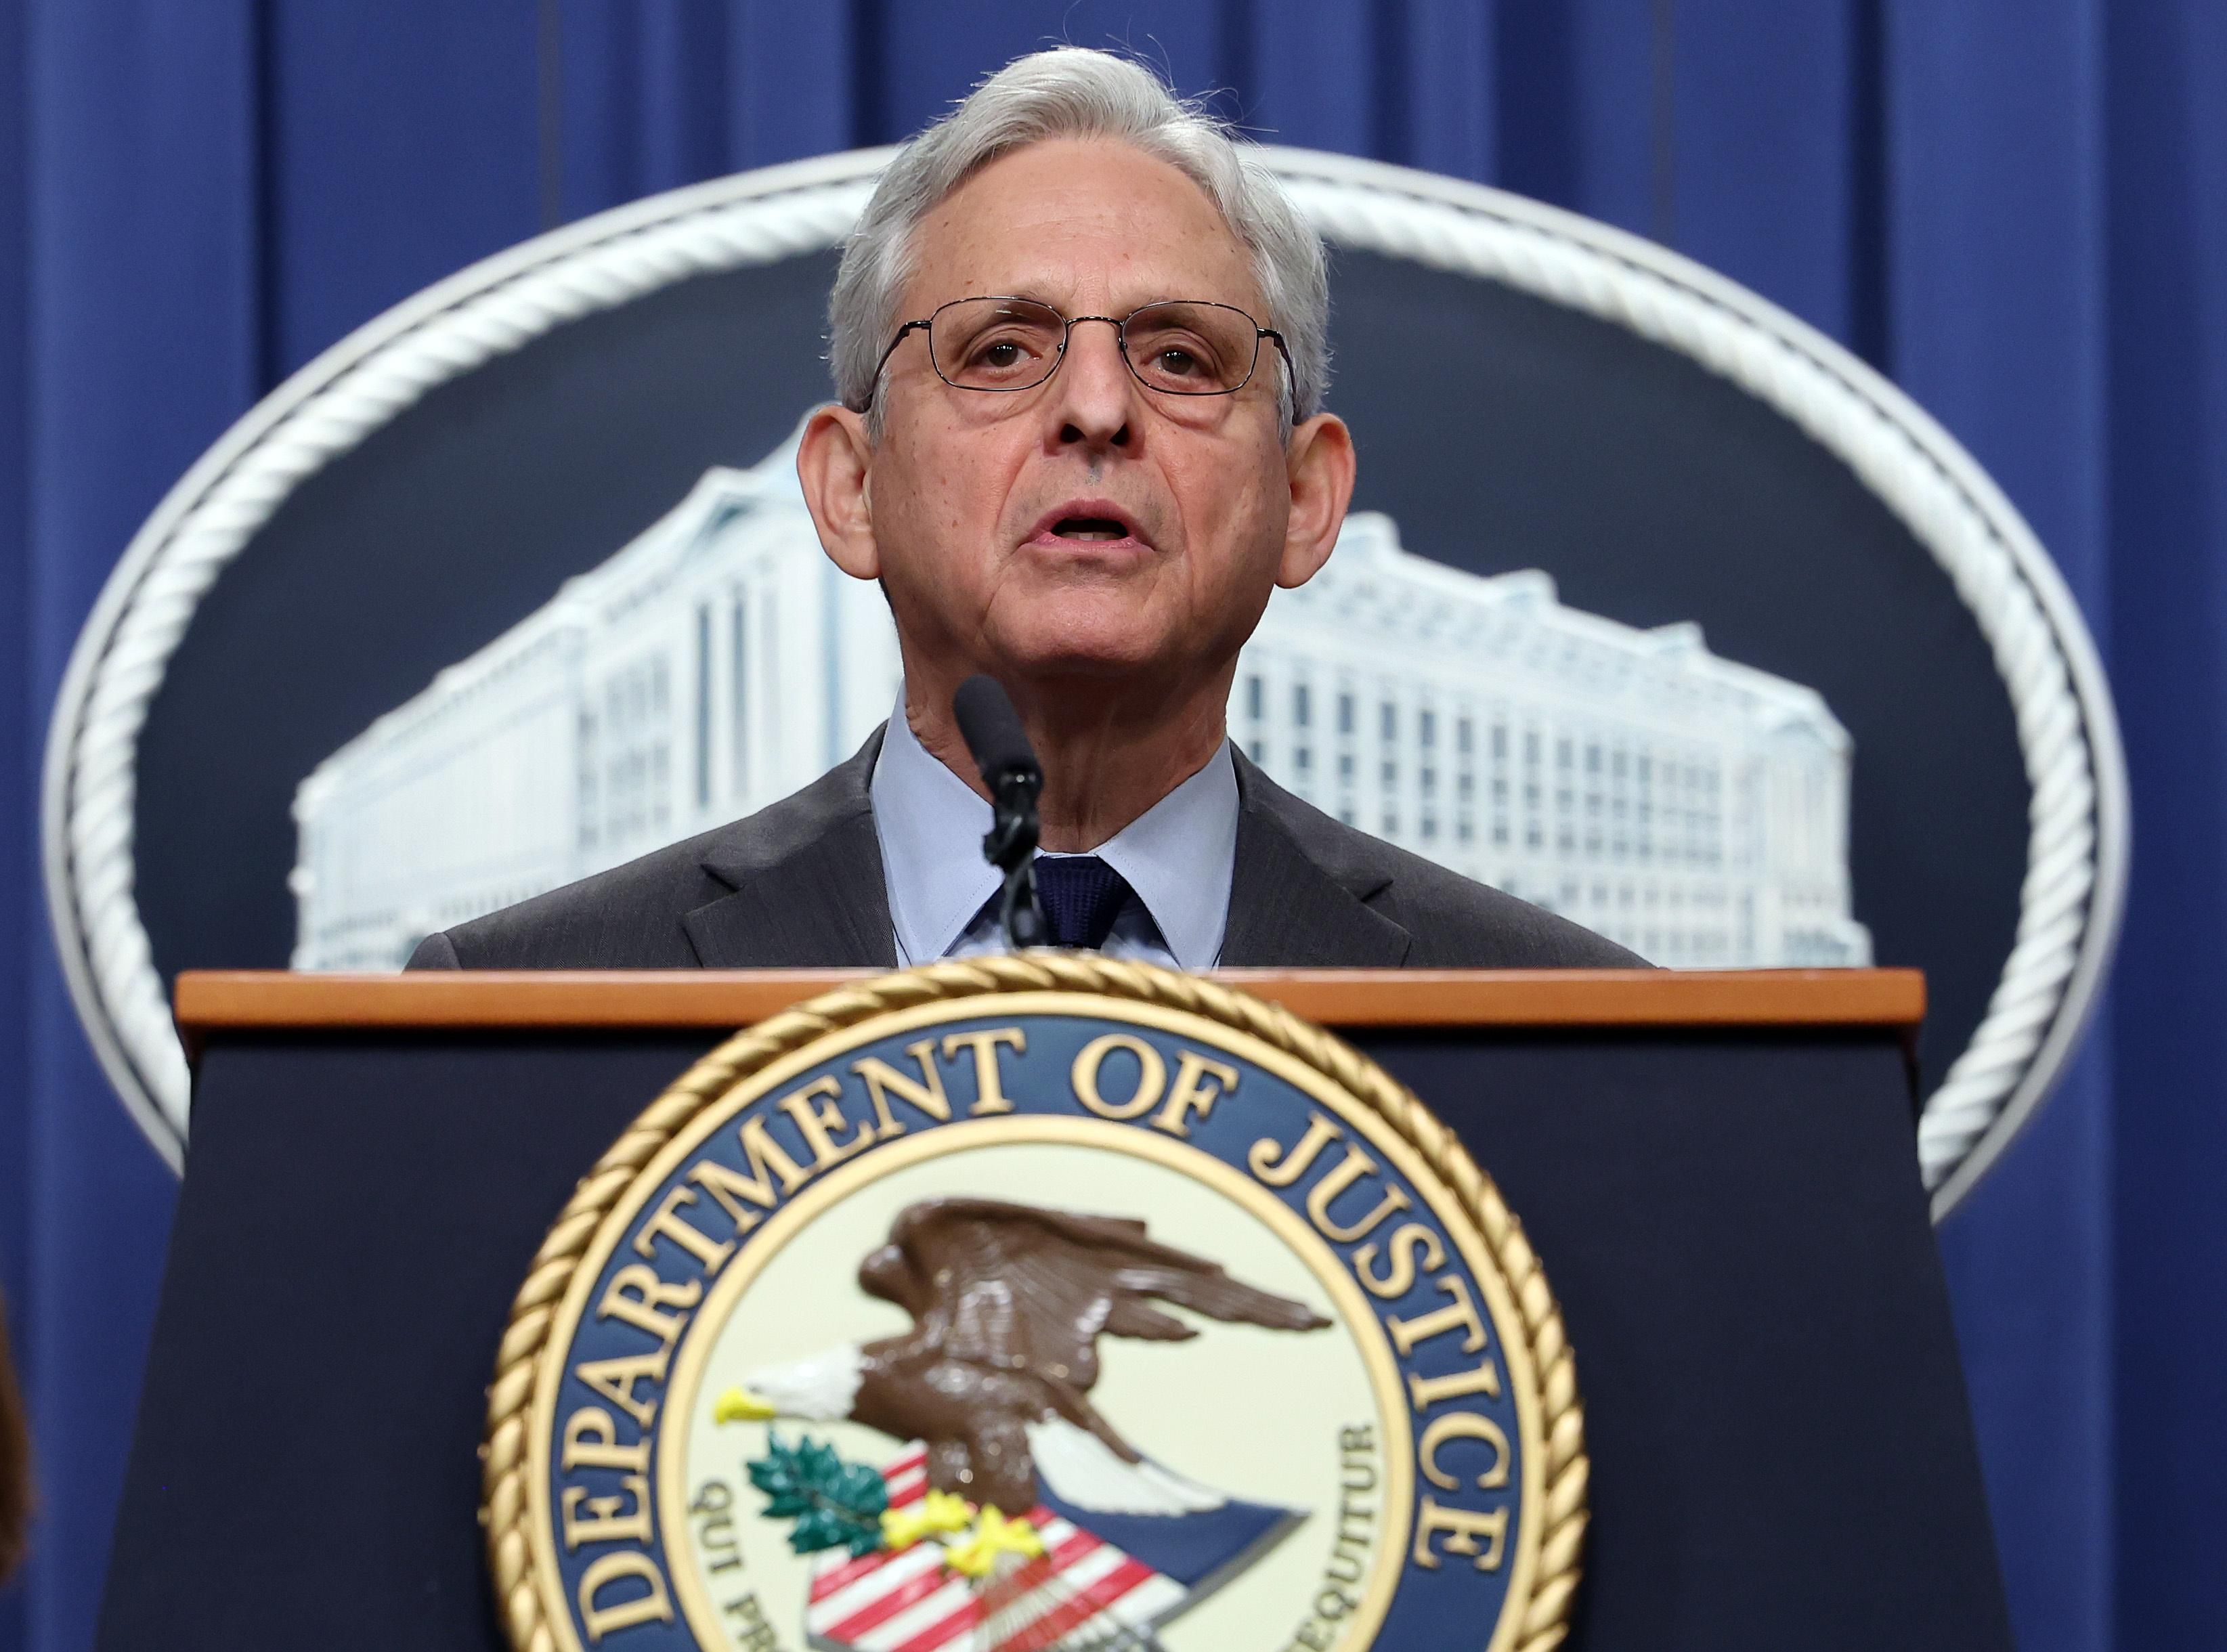 U.S. Attorney General Merrick Garland speaks at a press conference